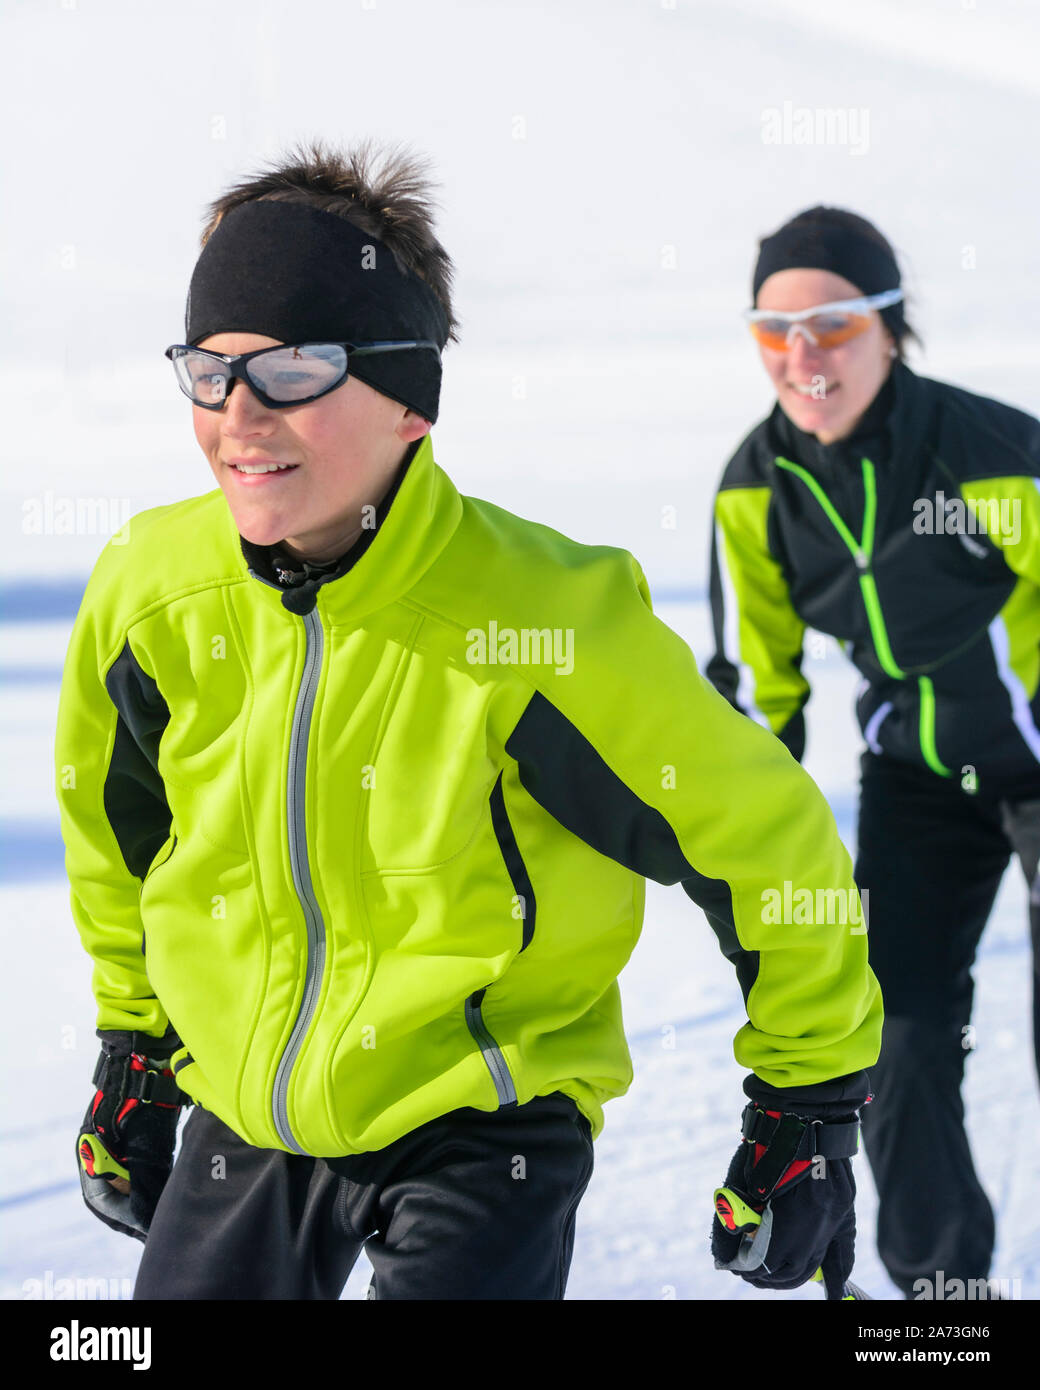 Young experts doing Cross-country skiing Stock Photo